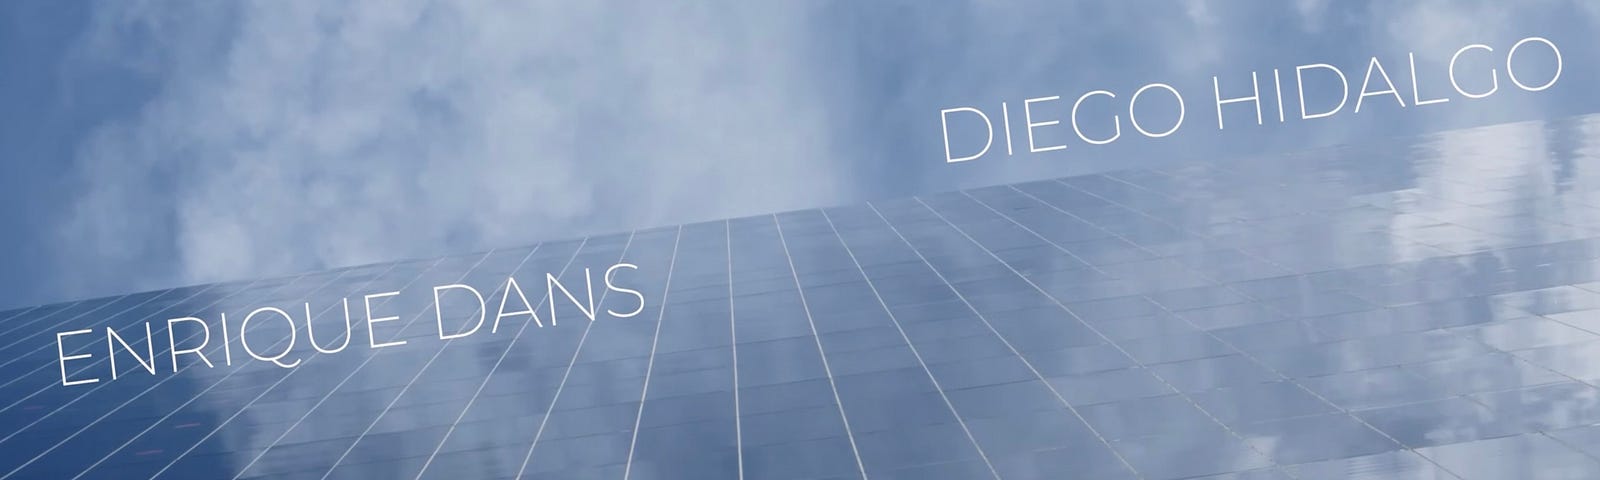 IMAGE: A take on the facade of the IE Tower with the names of Enrique Dans and Diego Hidalgo on top